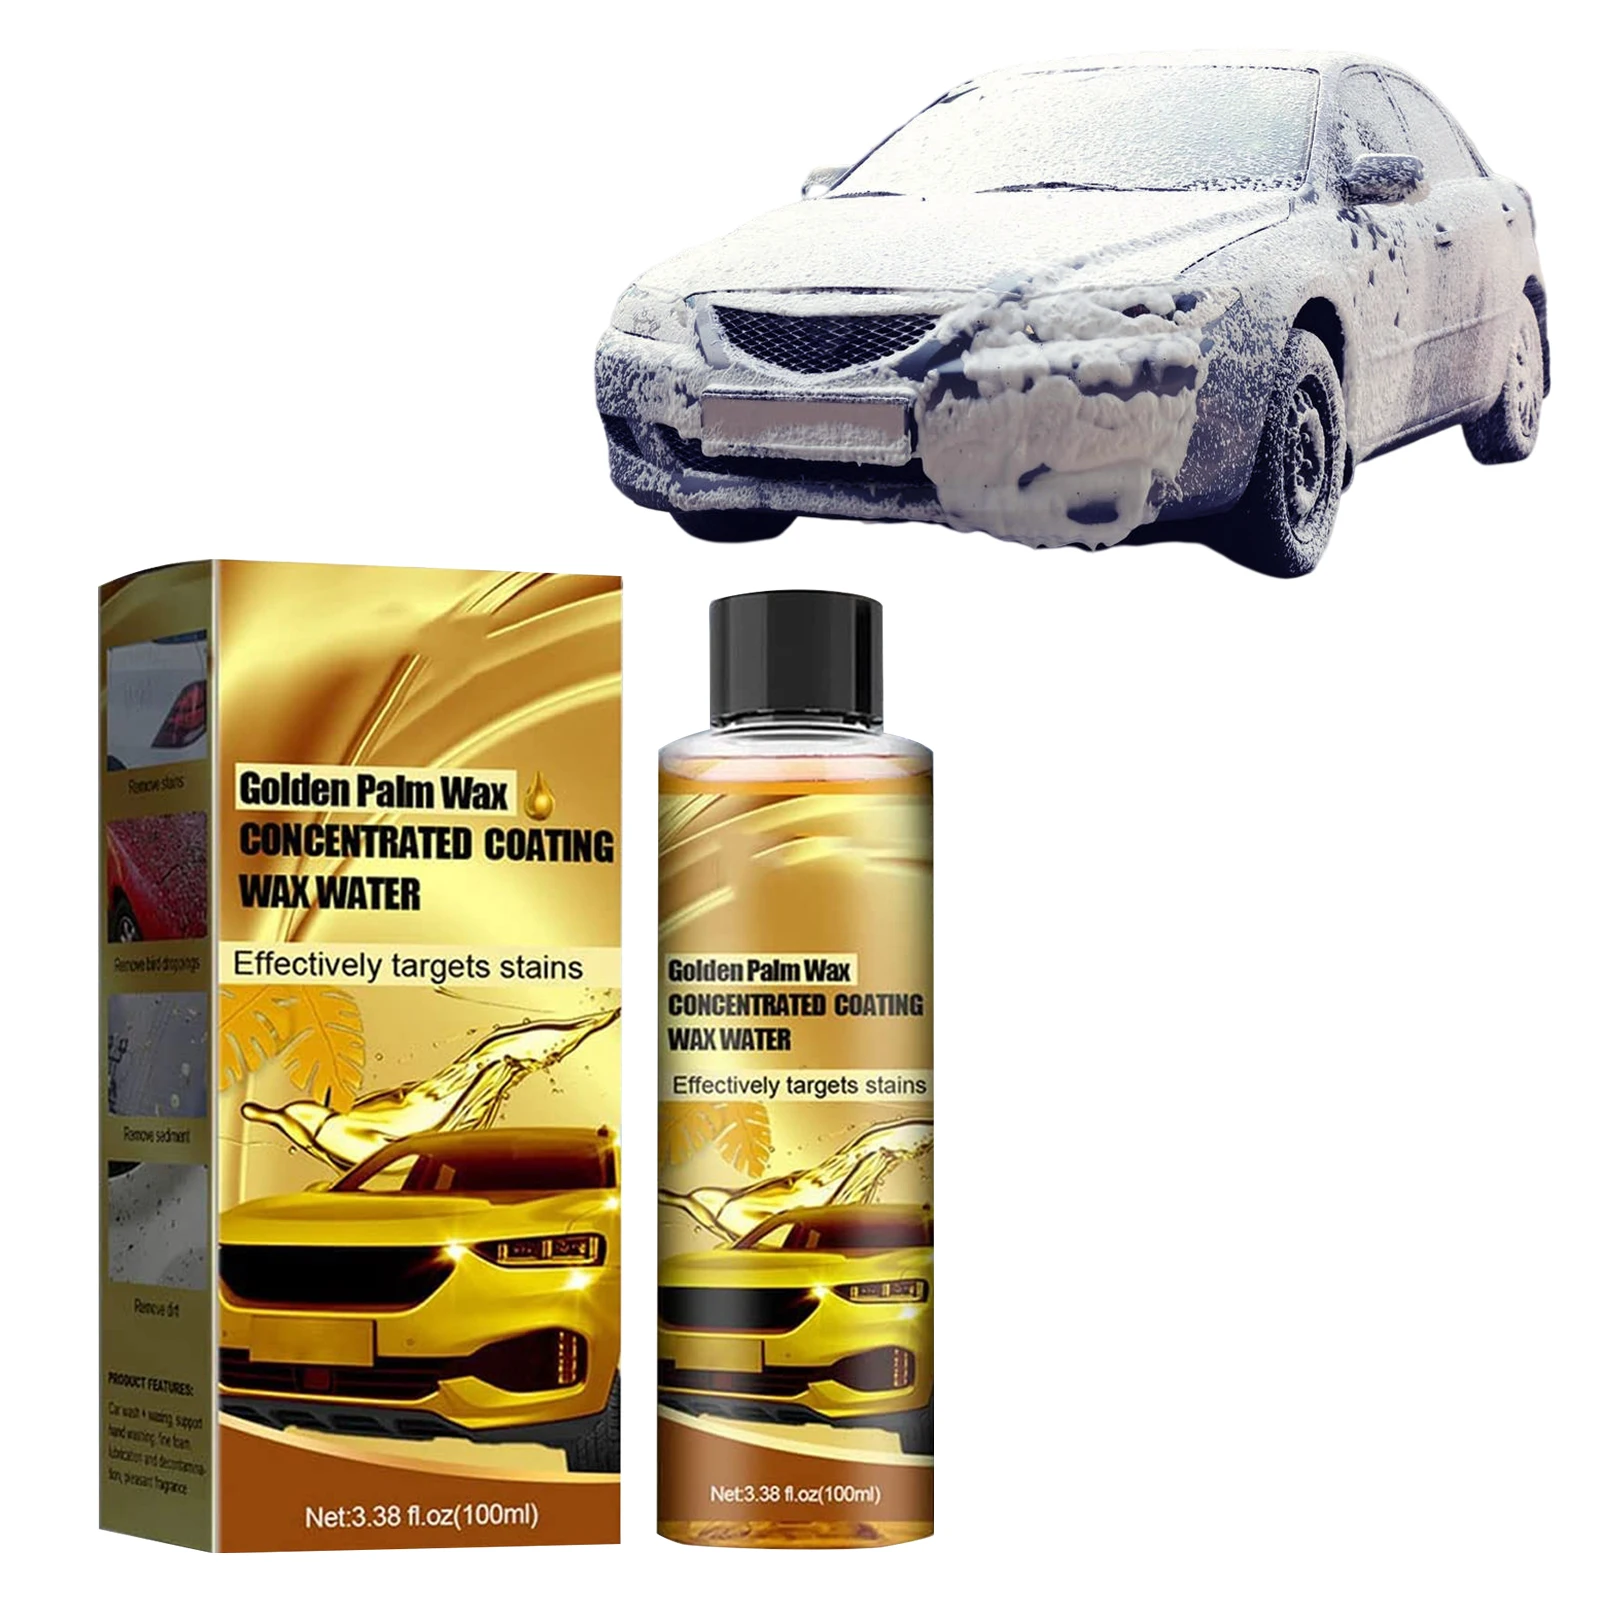 

Golden Carnuba Car Wash Wax Multi-use Car Stain Remover Car Detailing Supplies All-in-One For Car Washing Waxing And Polishing